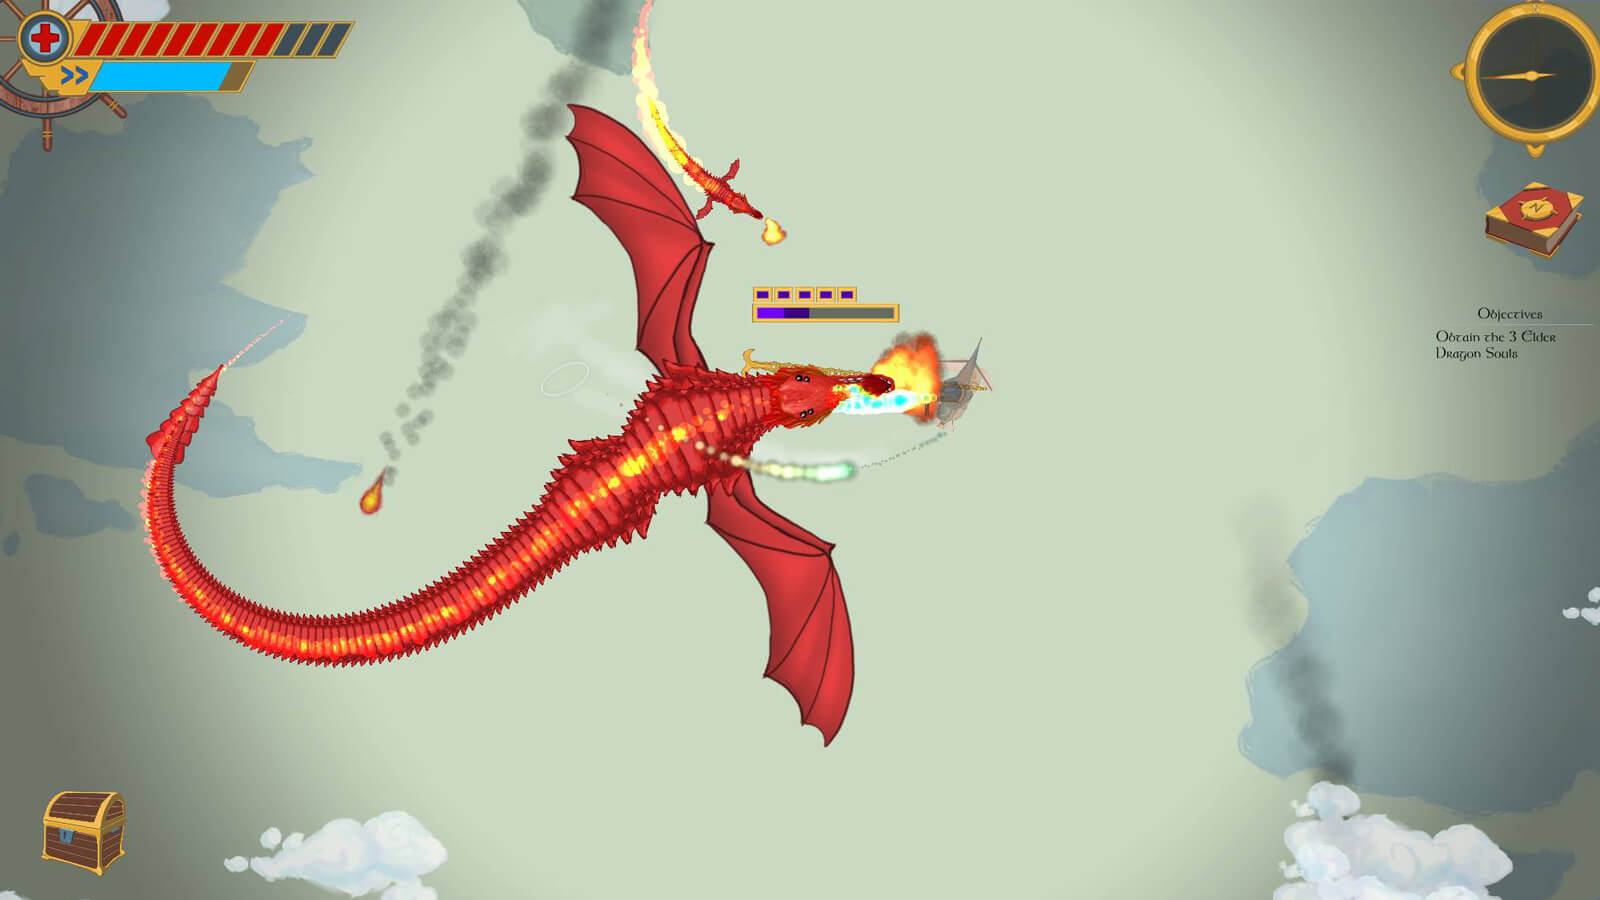 A red dragon breathing fire flies next to a much smaller red dragon also breathing fire, both attacking your airship.